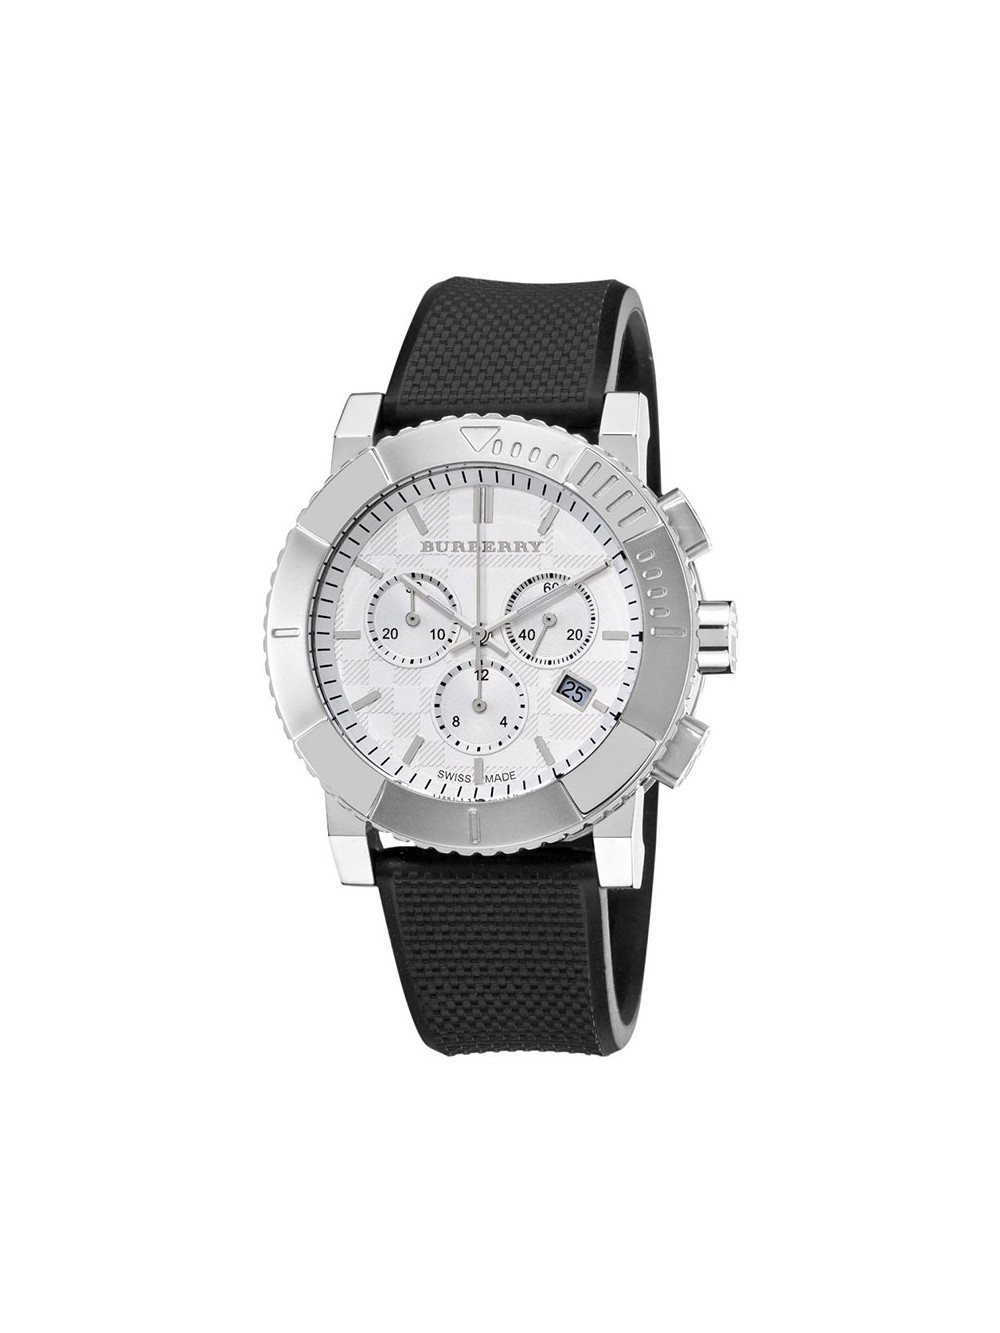 burberry mens watch leather strap